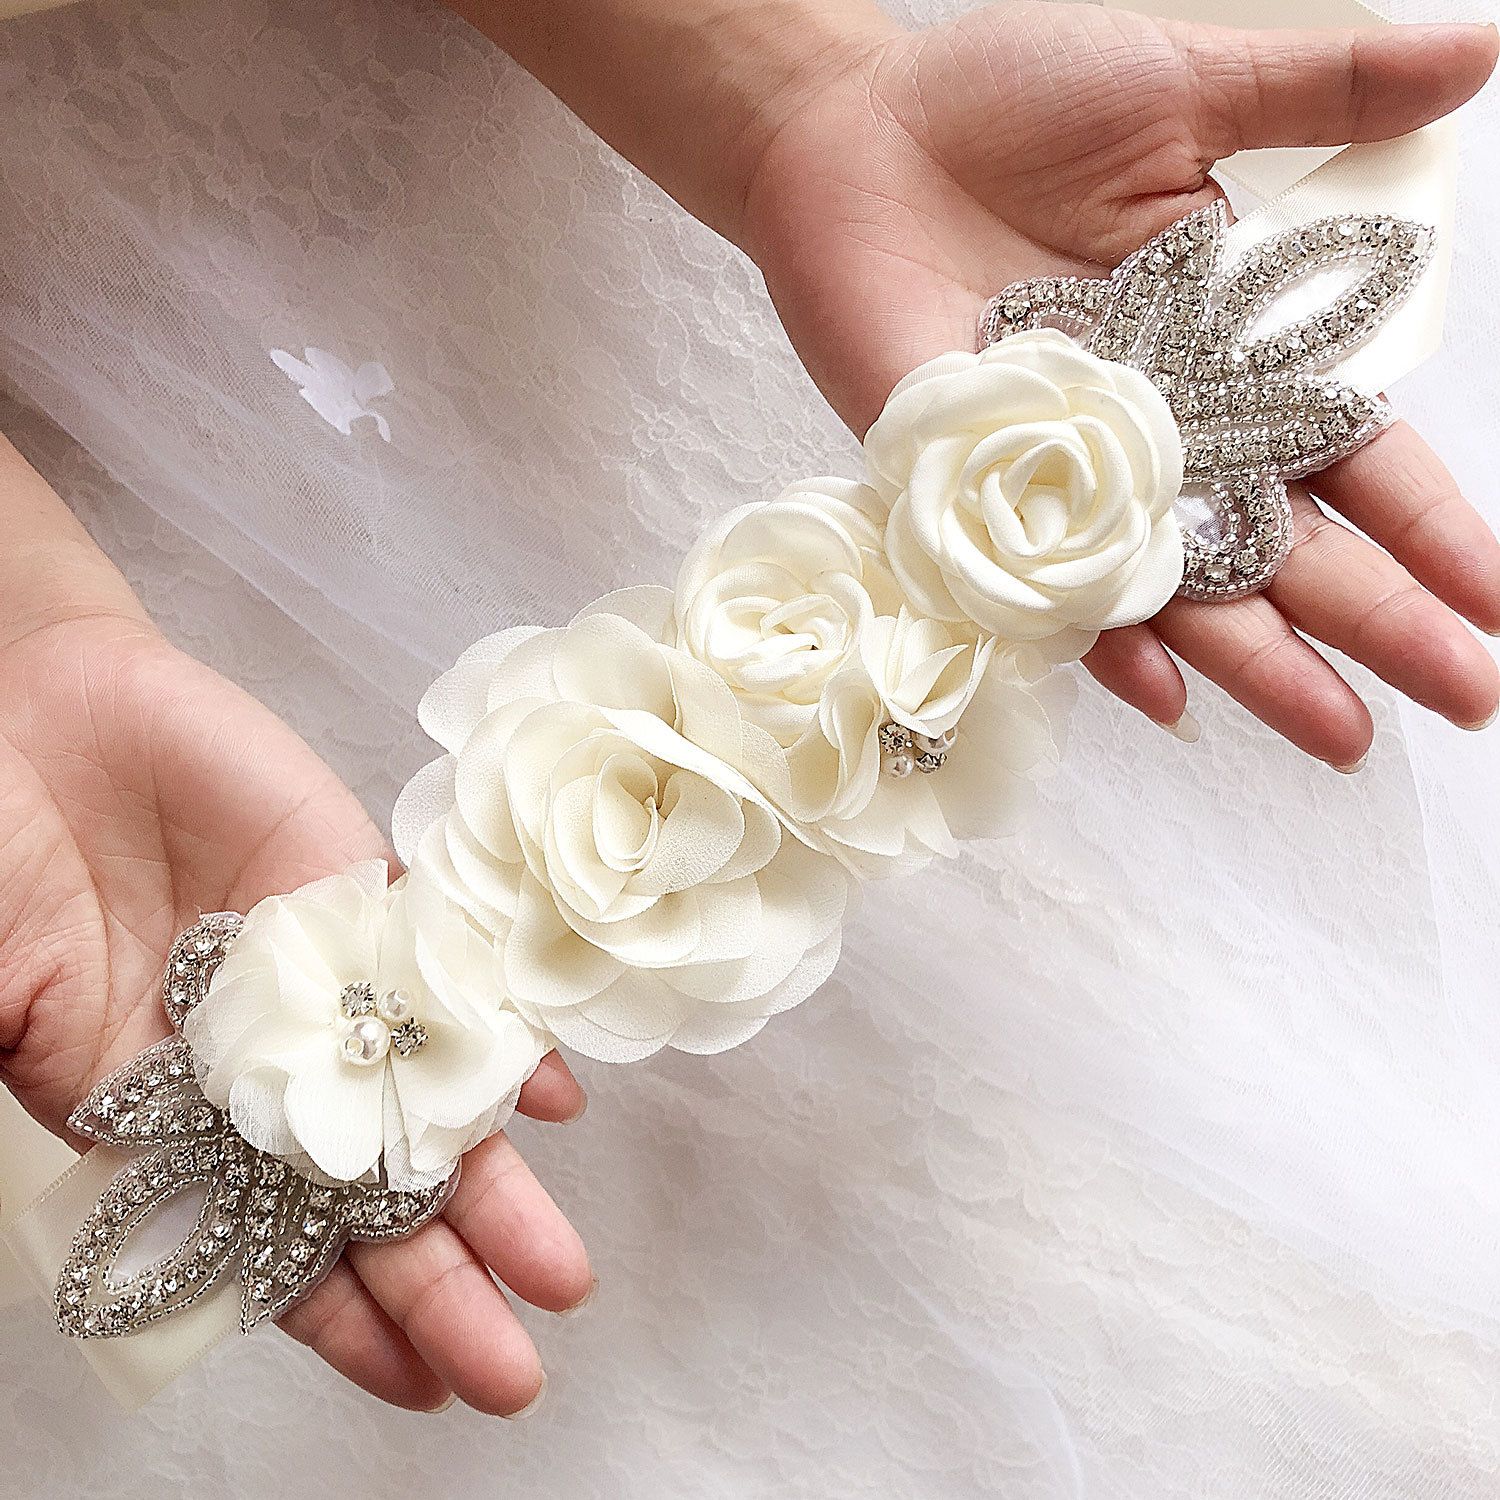 Elegant Blossom Crystal Wedding Belt Simulated Rose Beads & Rhinestone  Flower Embellished Waistband By Pearl Accessories From Cat11cat, $11.95